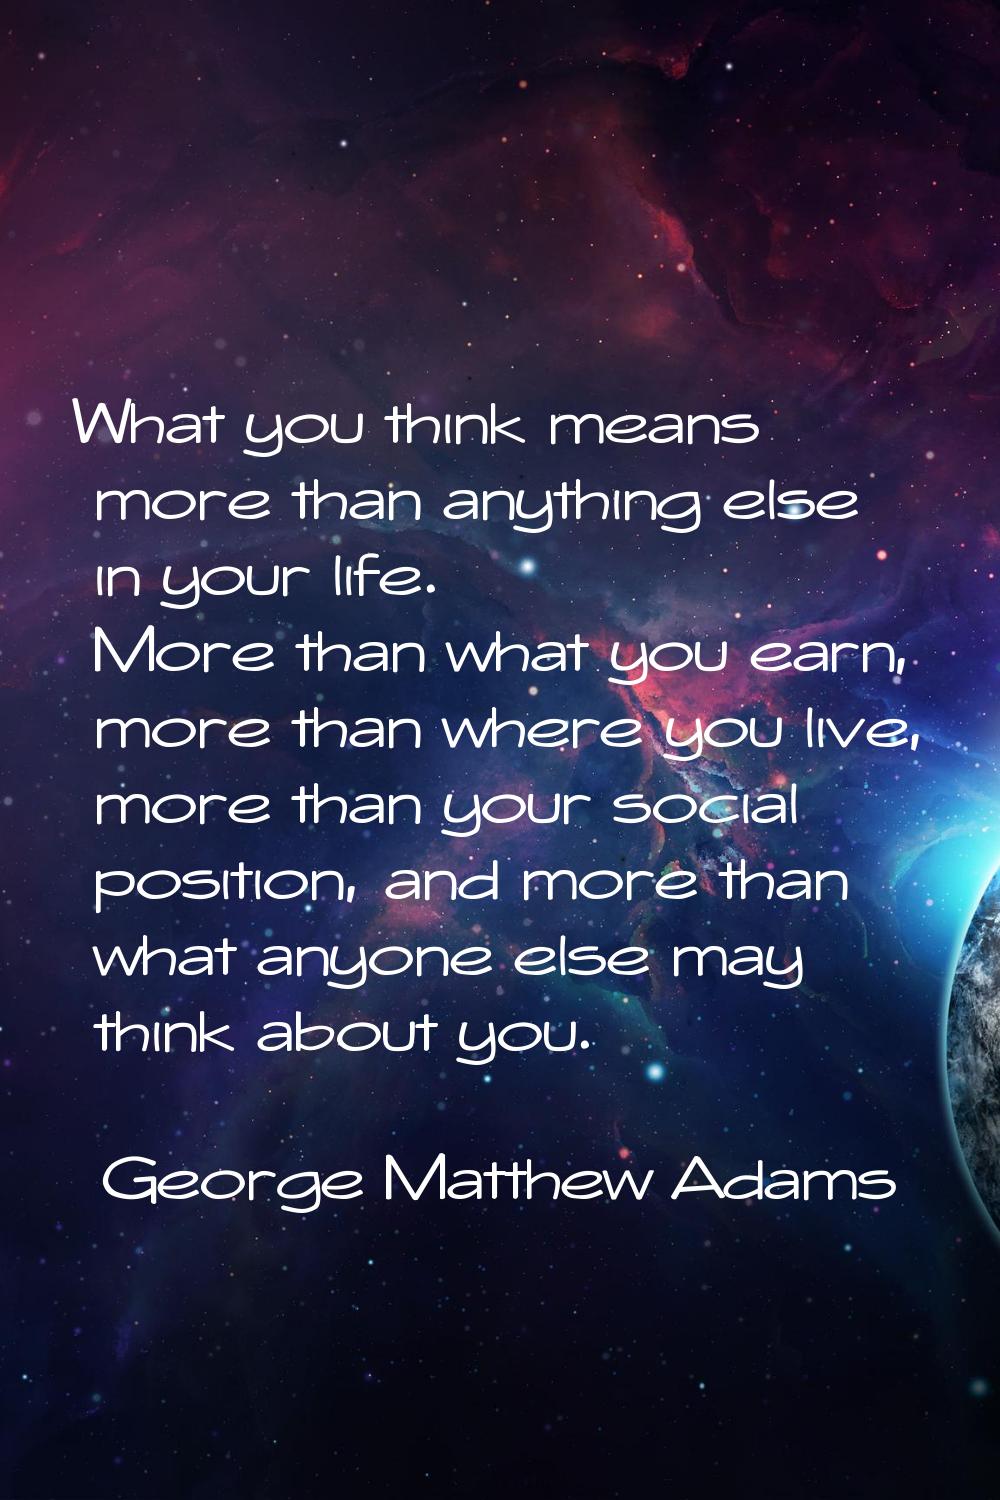 What you think means more than anything else in your life. More than what you earn, more than where